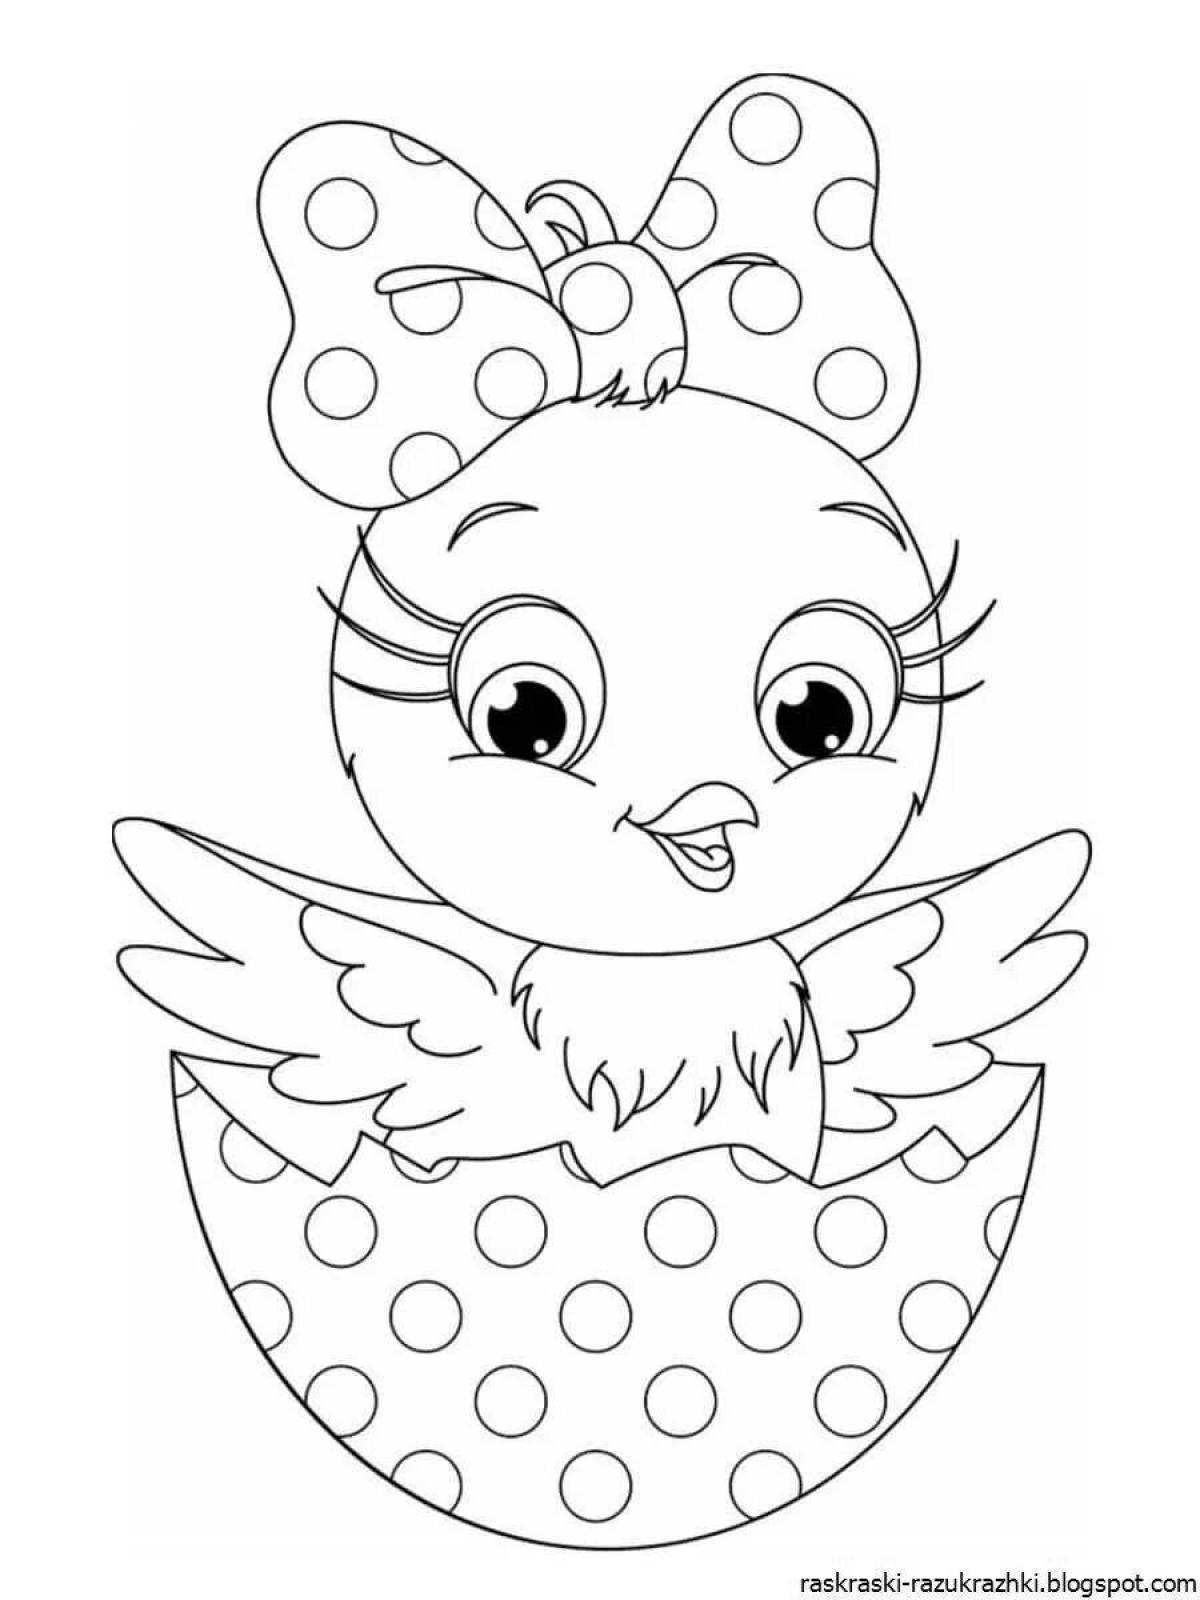 Coloring page clapping chicks